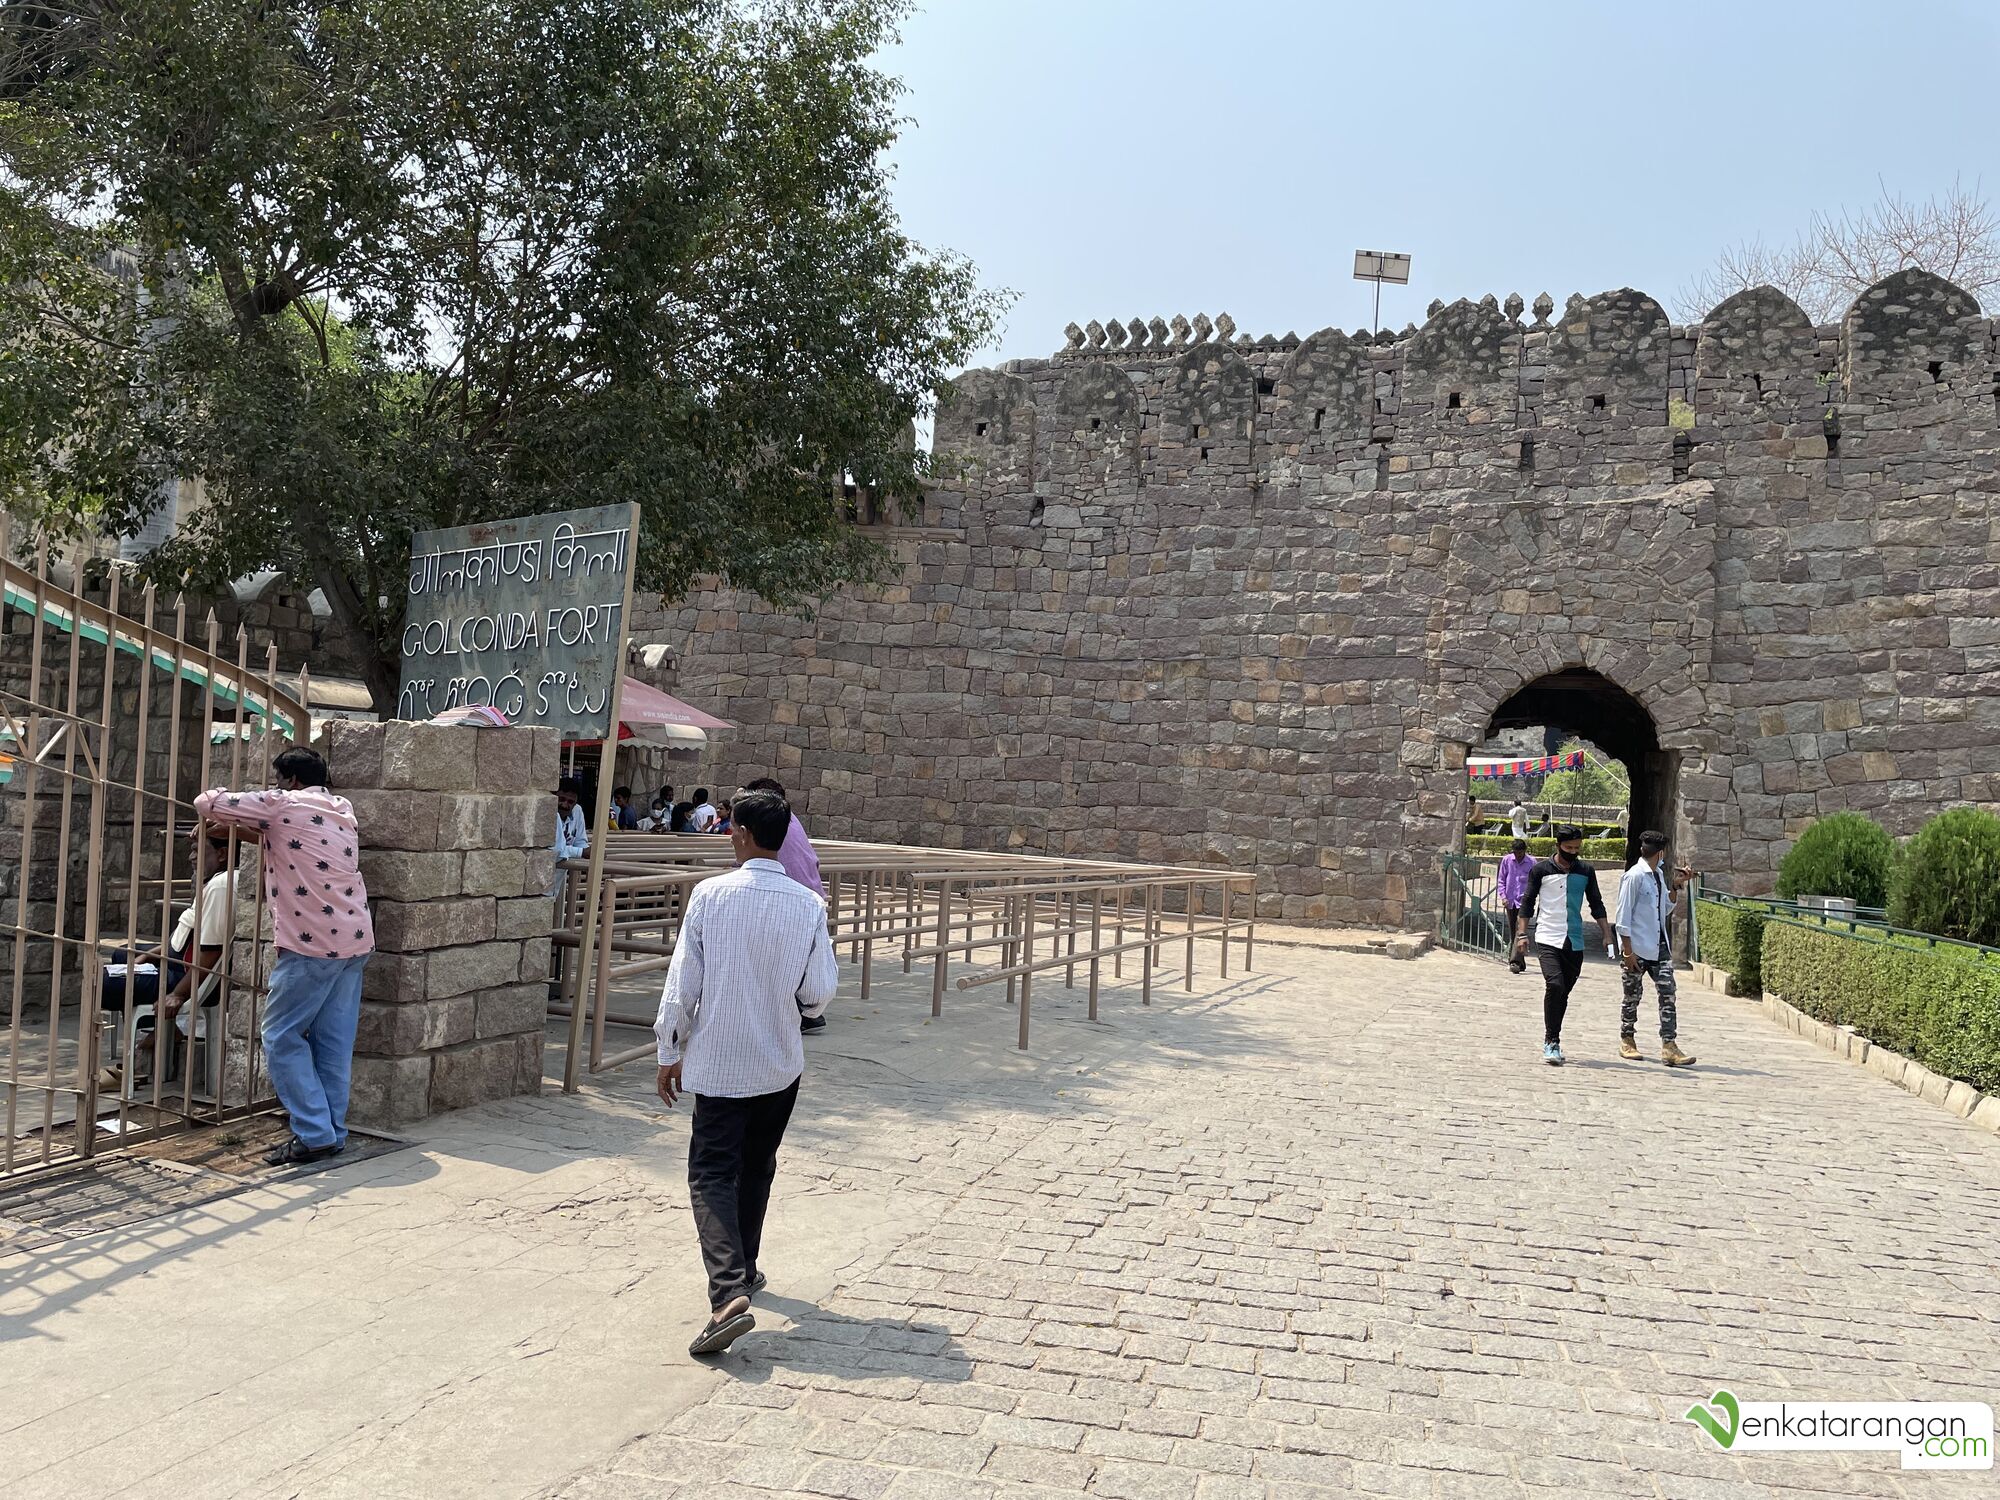 Golconda Fort - Ticket was ₹25 per person (Indian resident)